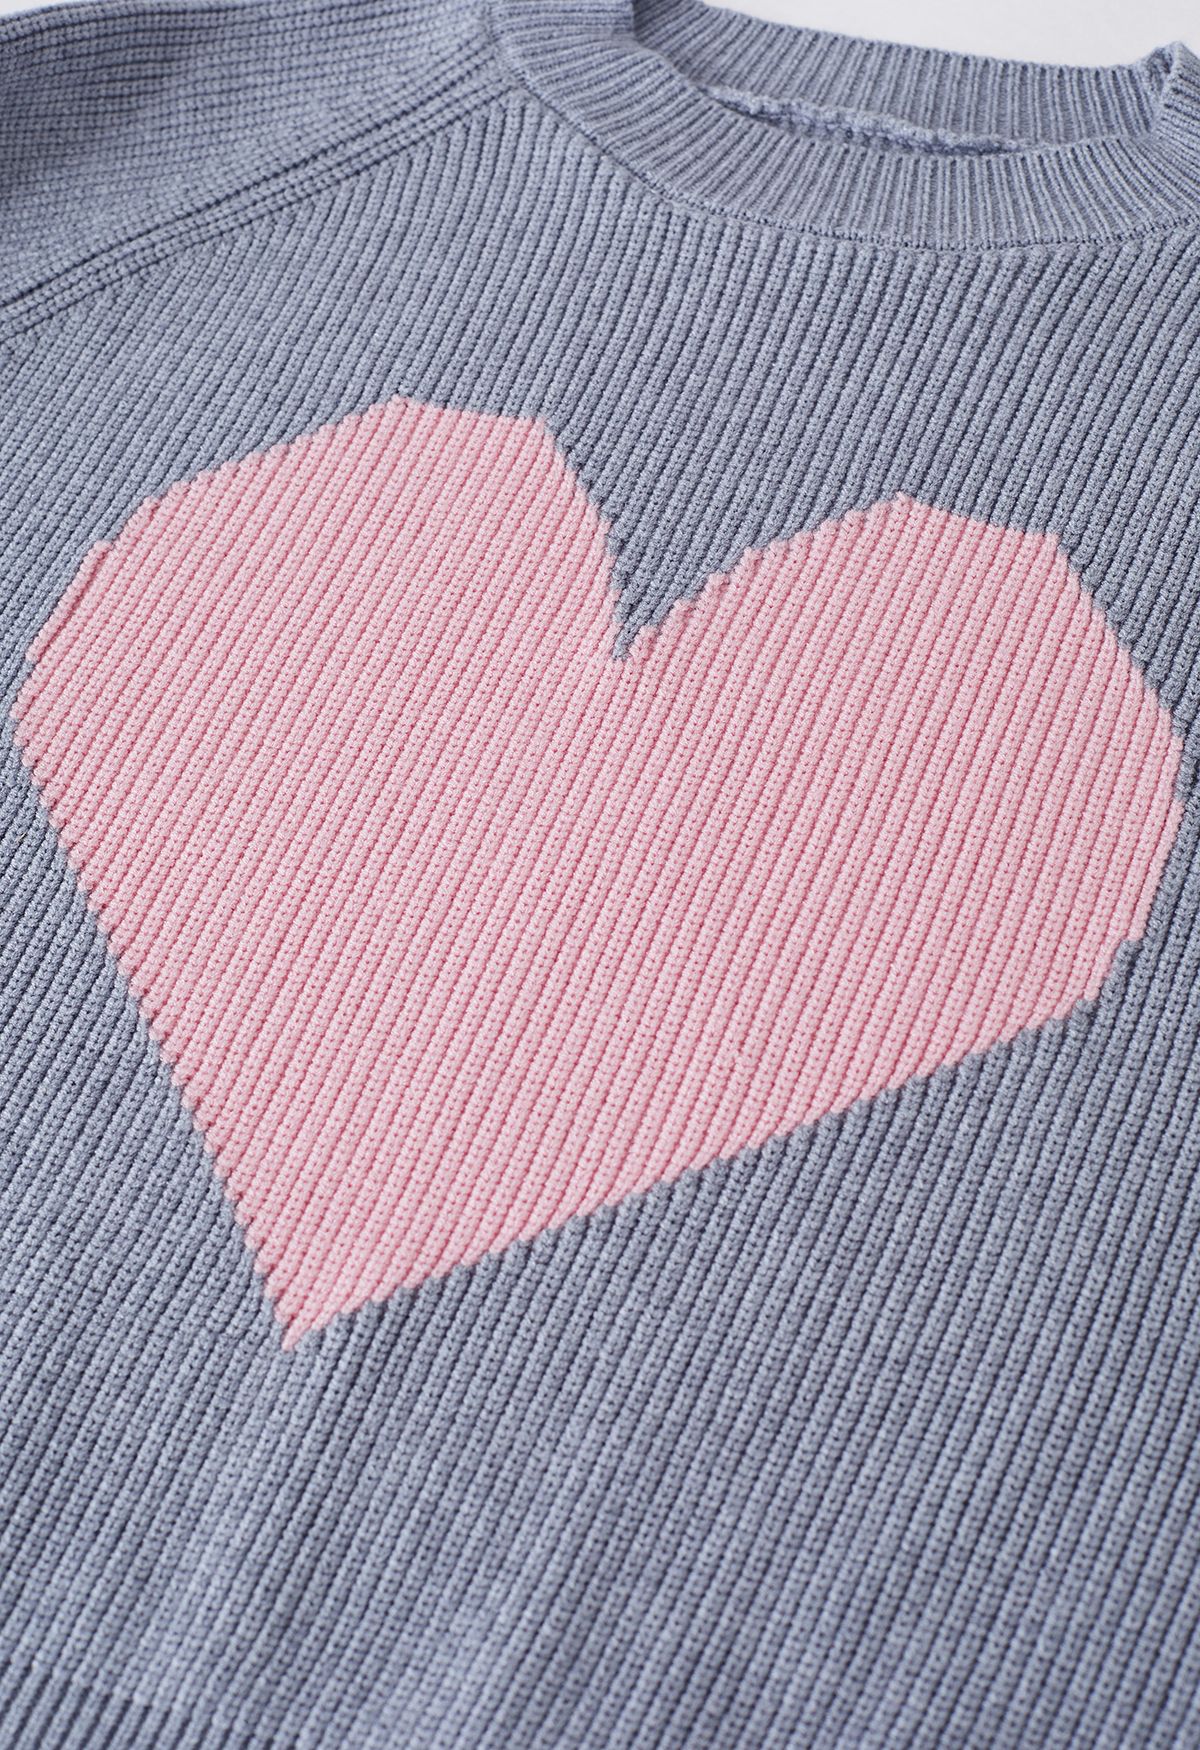 One Heart Rippstrick-Oversized-Pullover in Grau